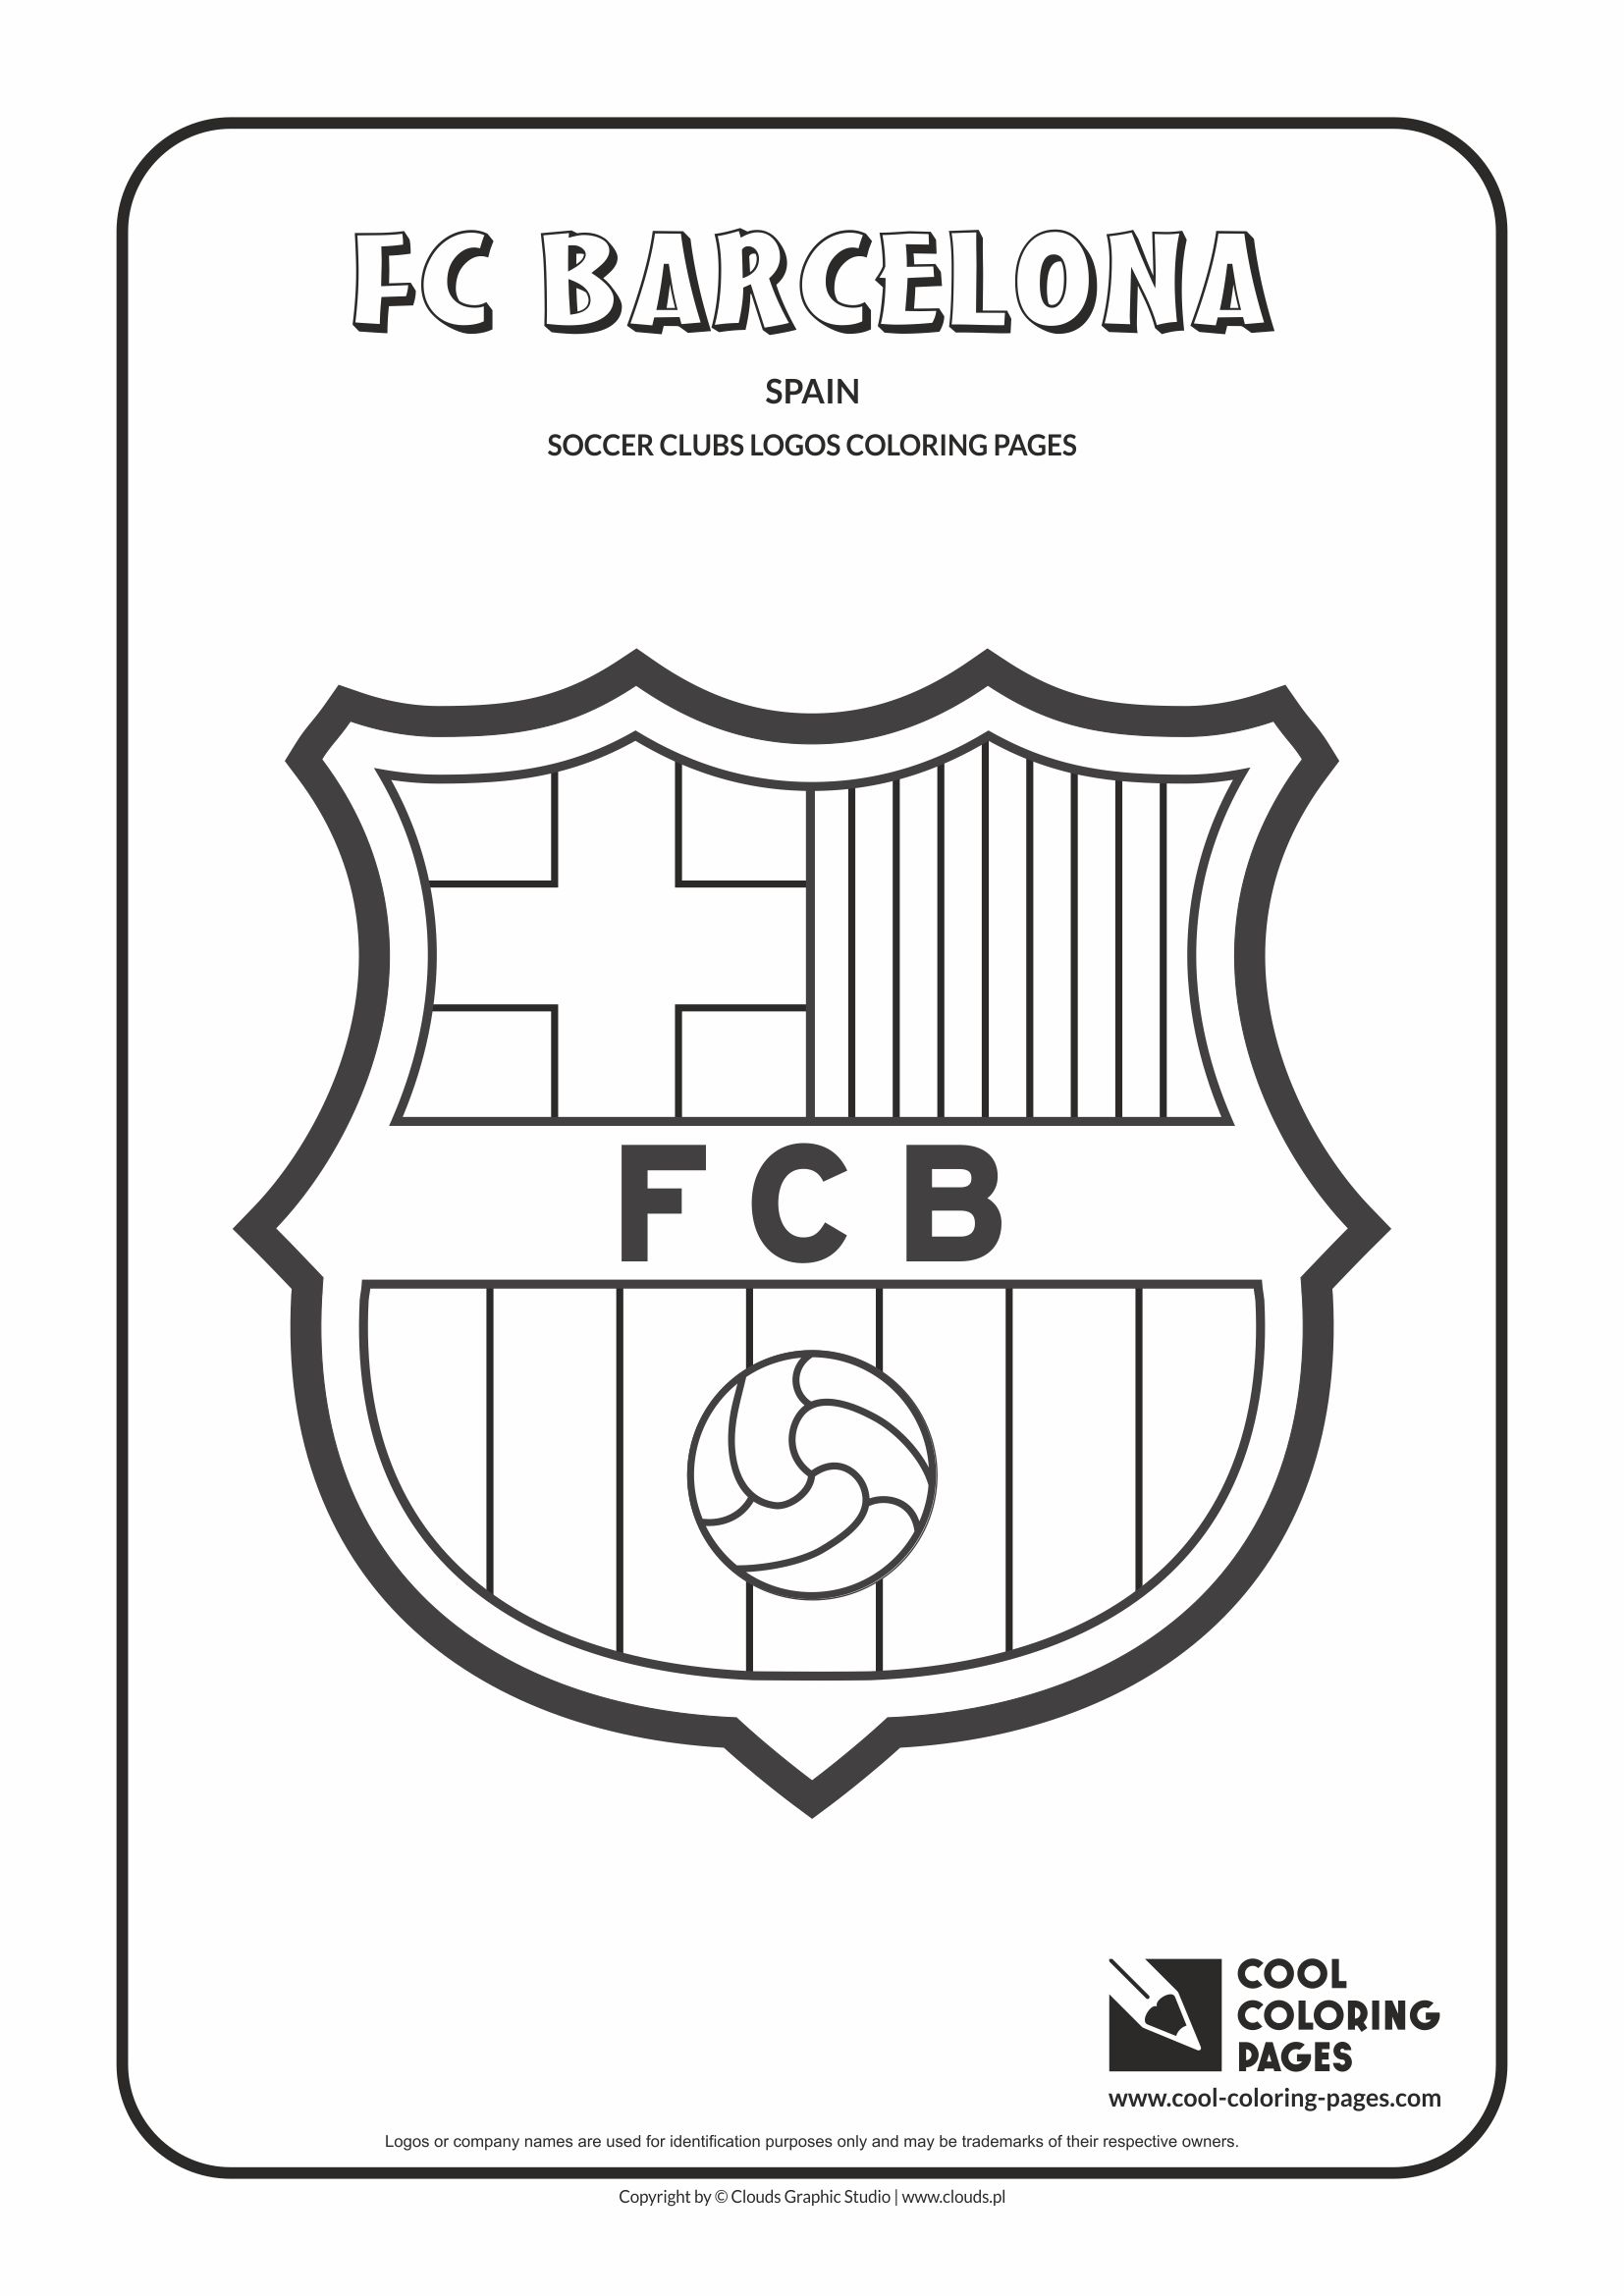 Cool Coloring Pages - Others / FC Barcelona logo / Coloring page with FC Barcelona logo